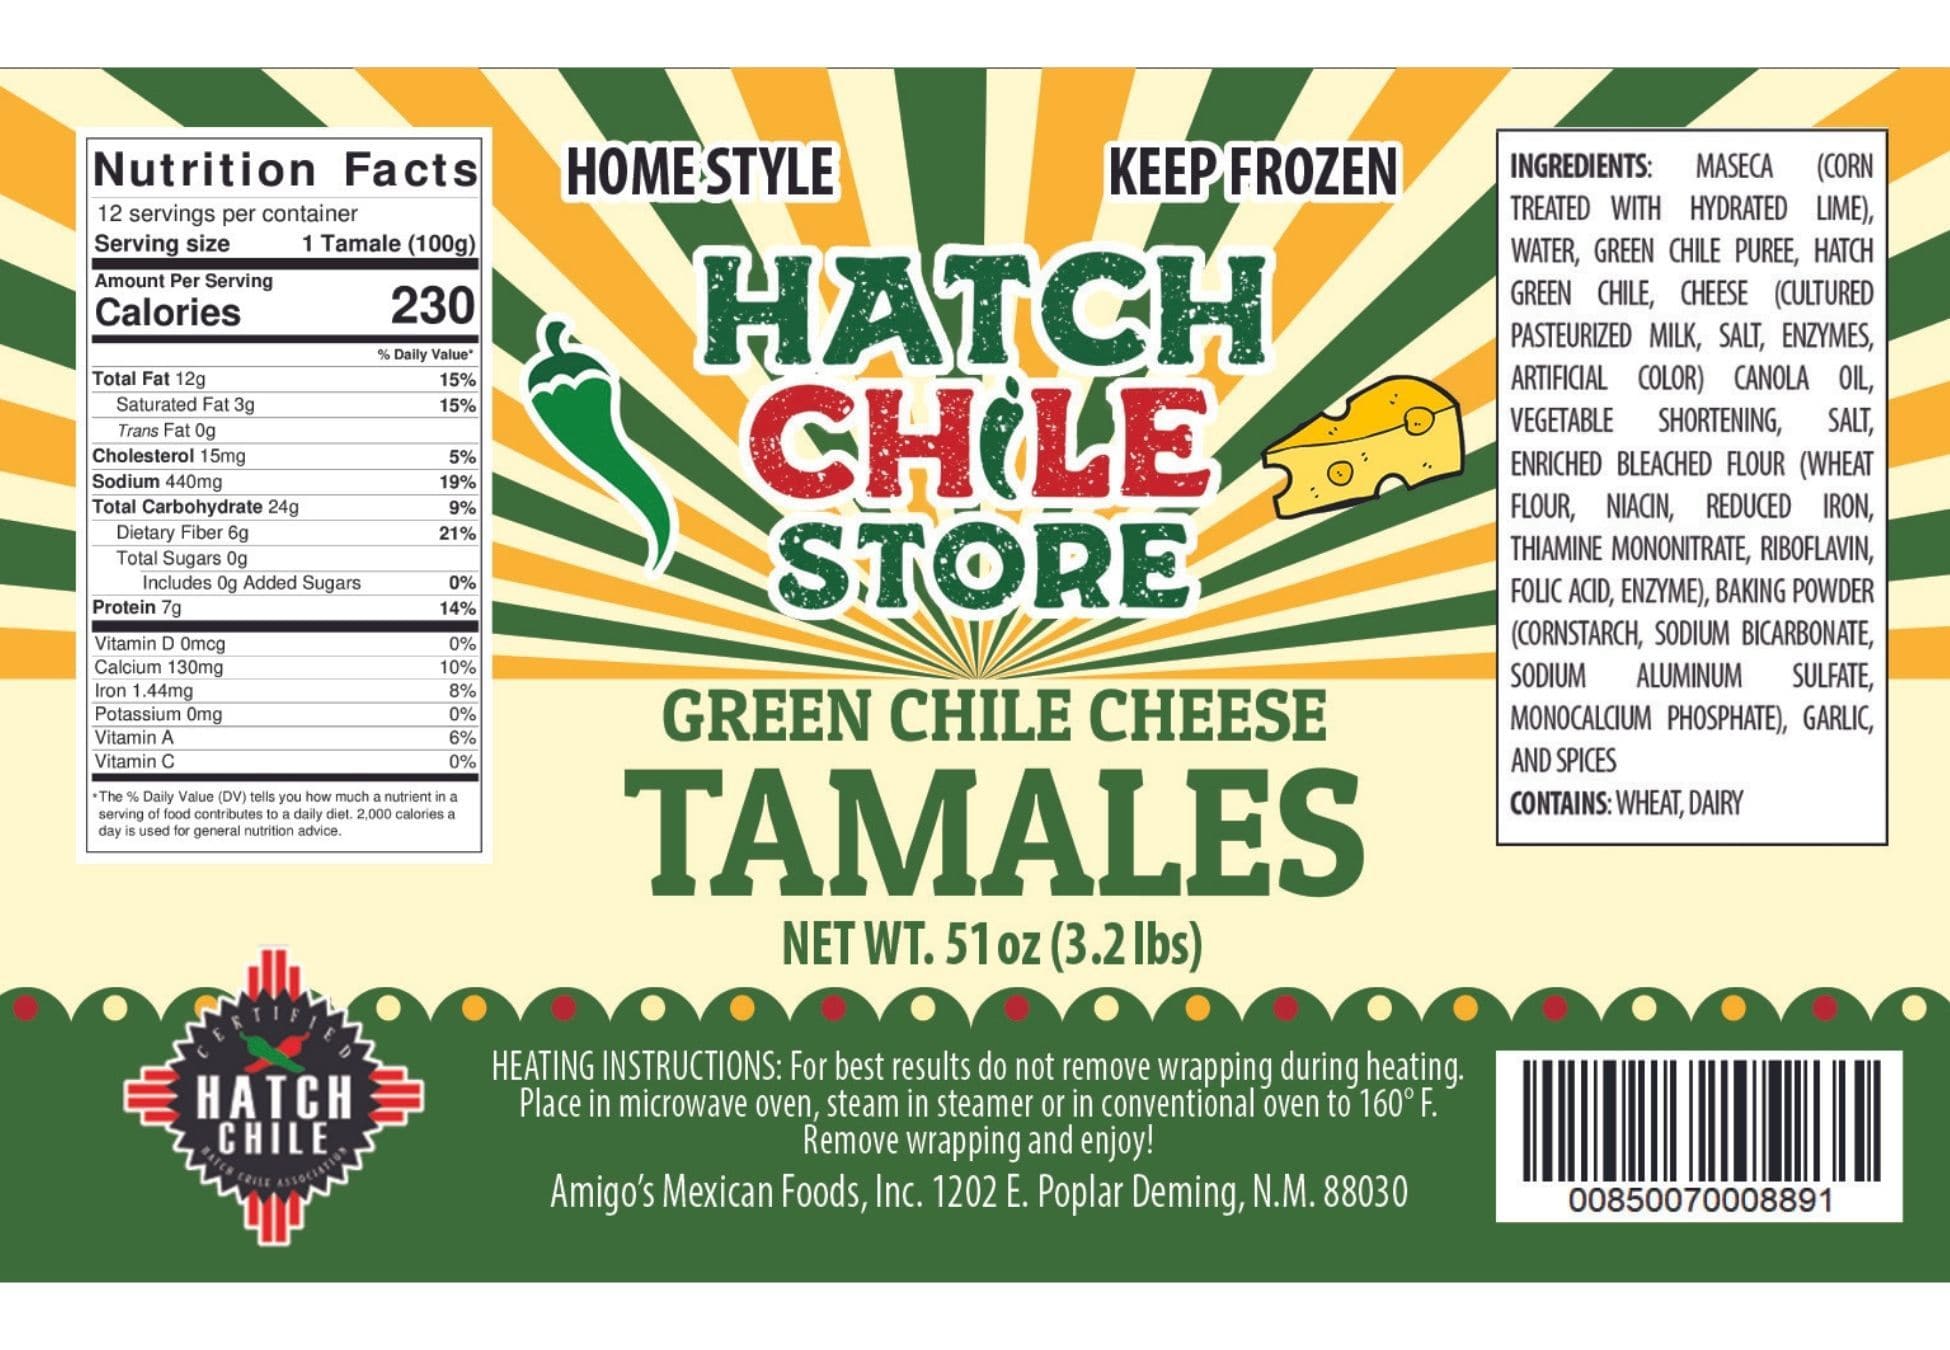 Packaging of Hatch Green Chile Cheese Tamales includes logos, nutrition facts, ingredients list, and heating instructions for the Hatch Green Chile Cheese Tamales.